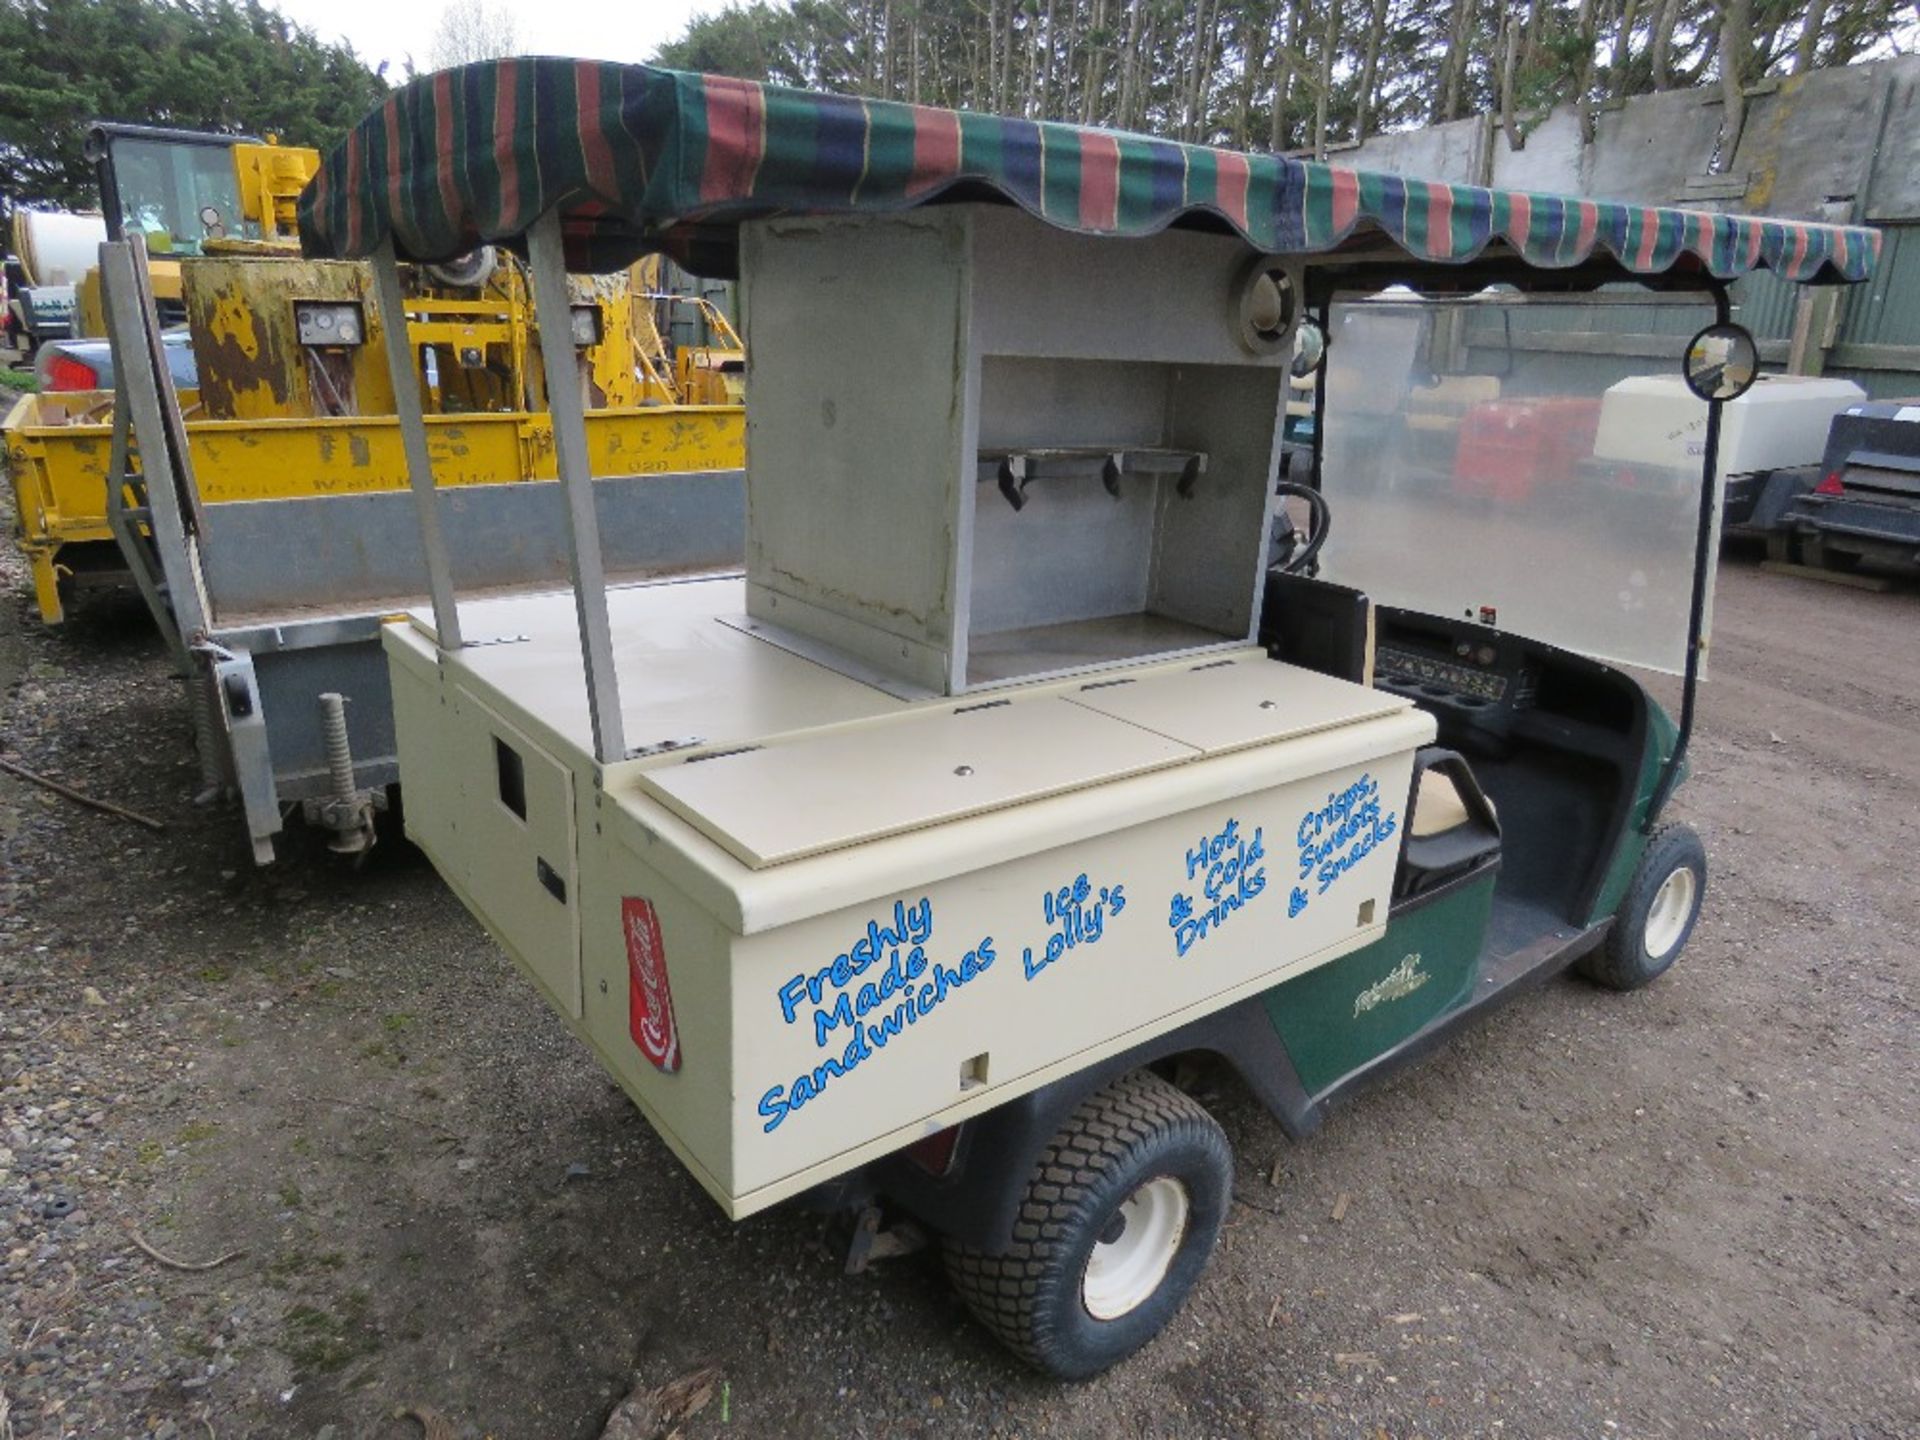 EZGO PETROL ENGINED GOLF BUGGY / CATERING TRUCK. DIRECT FROM FISHING LAKES WHO NO LONGER PROVIDE CAT - Image 4 of 20